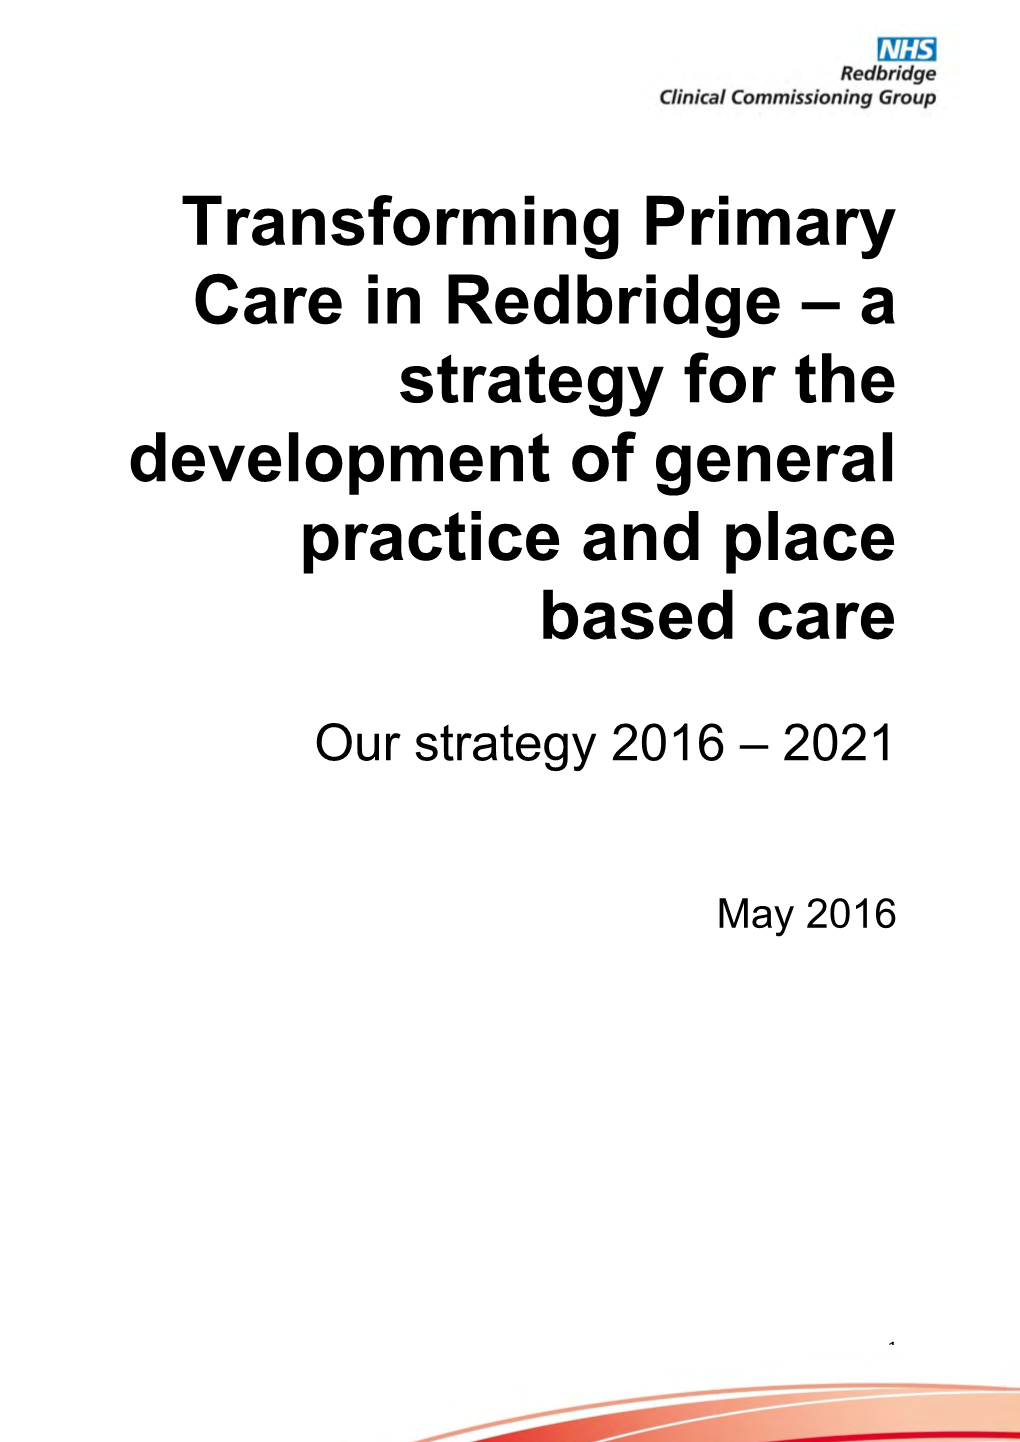 Transforming Primary Care in Redbridge – a Strategy for the Development of General Practice and Place Based Care